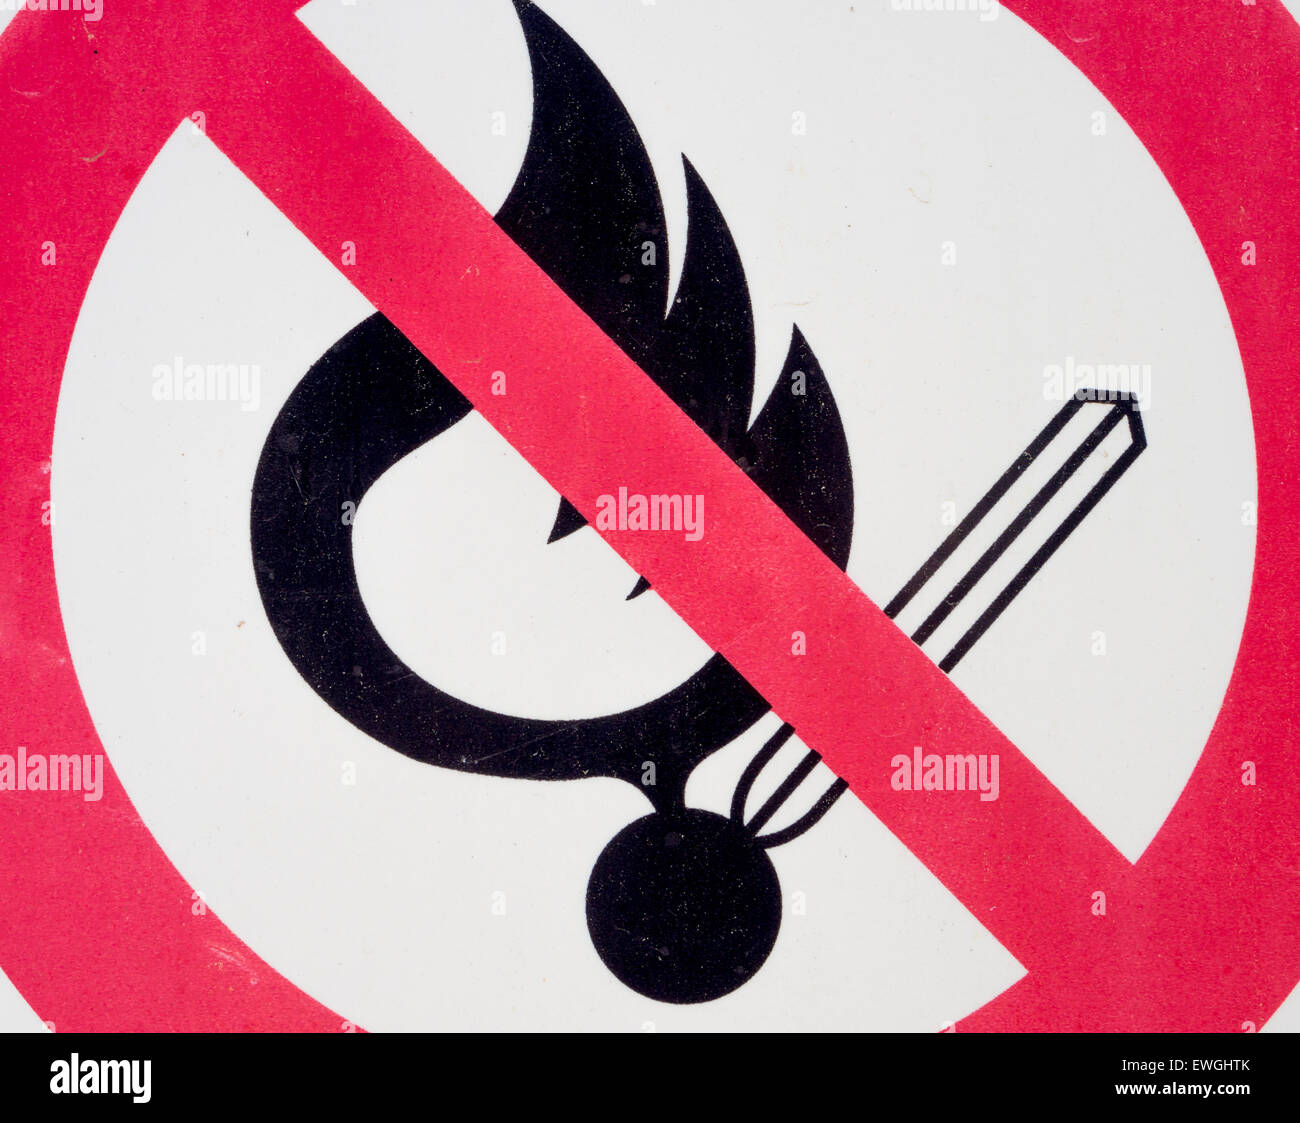 Particular of a sign prohibiting the lighting of flame. Stock Photo